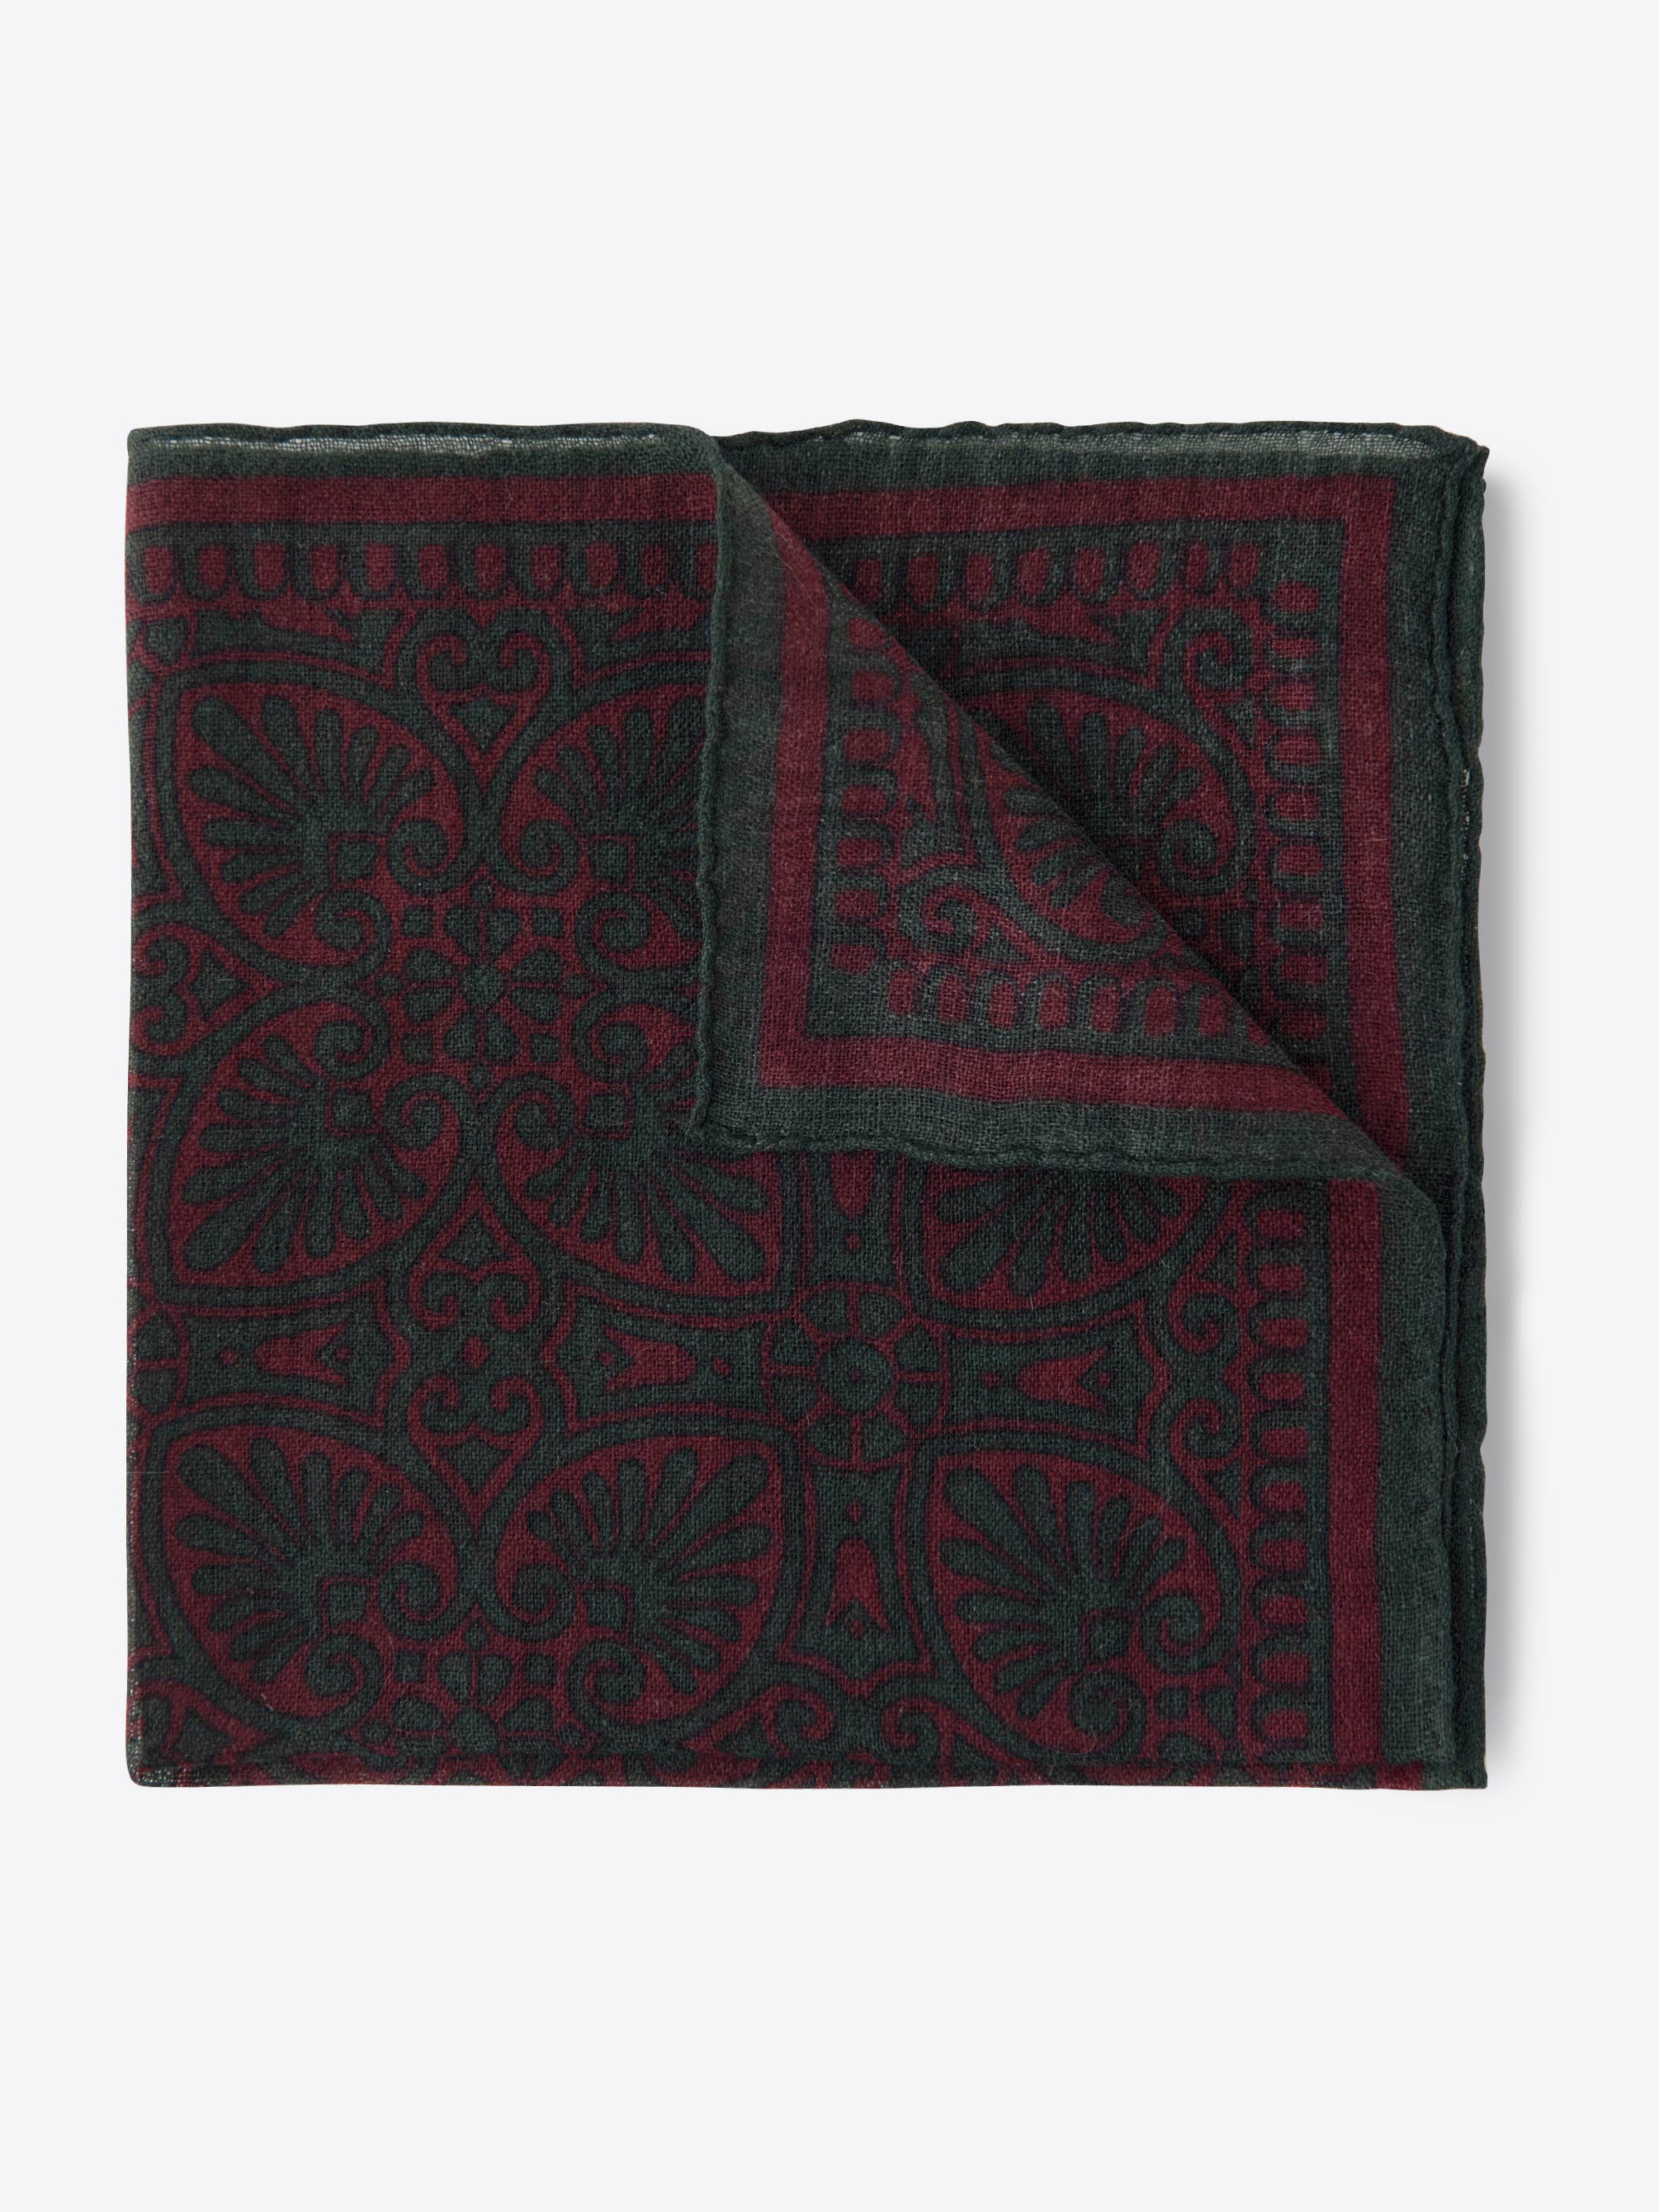 Zoom Image of Faded Scarlet and Green Paisley Pocket Square